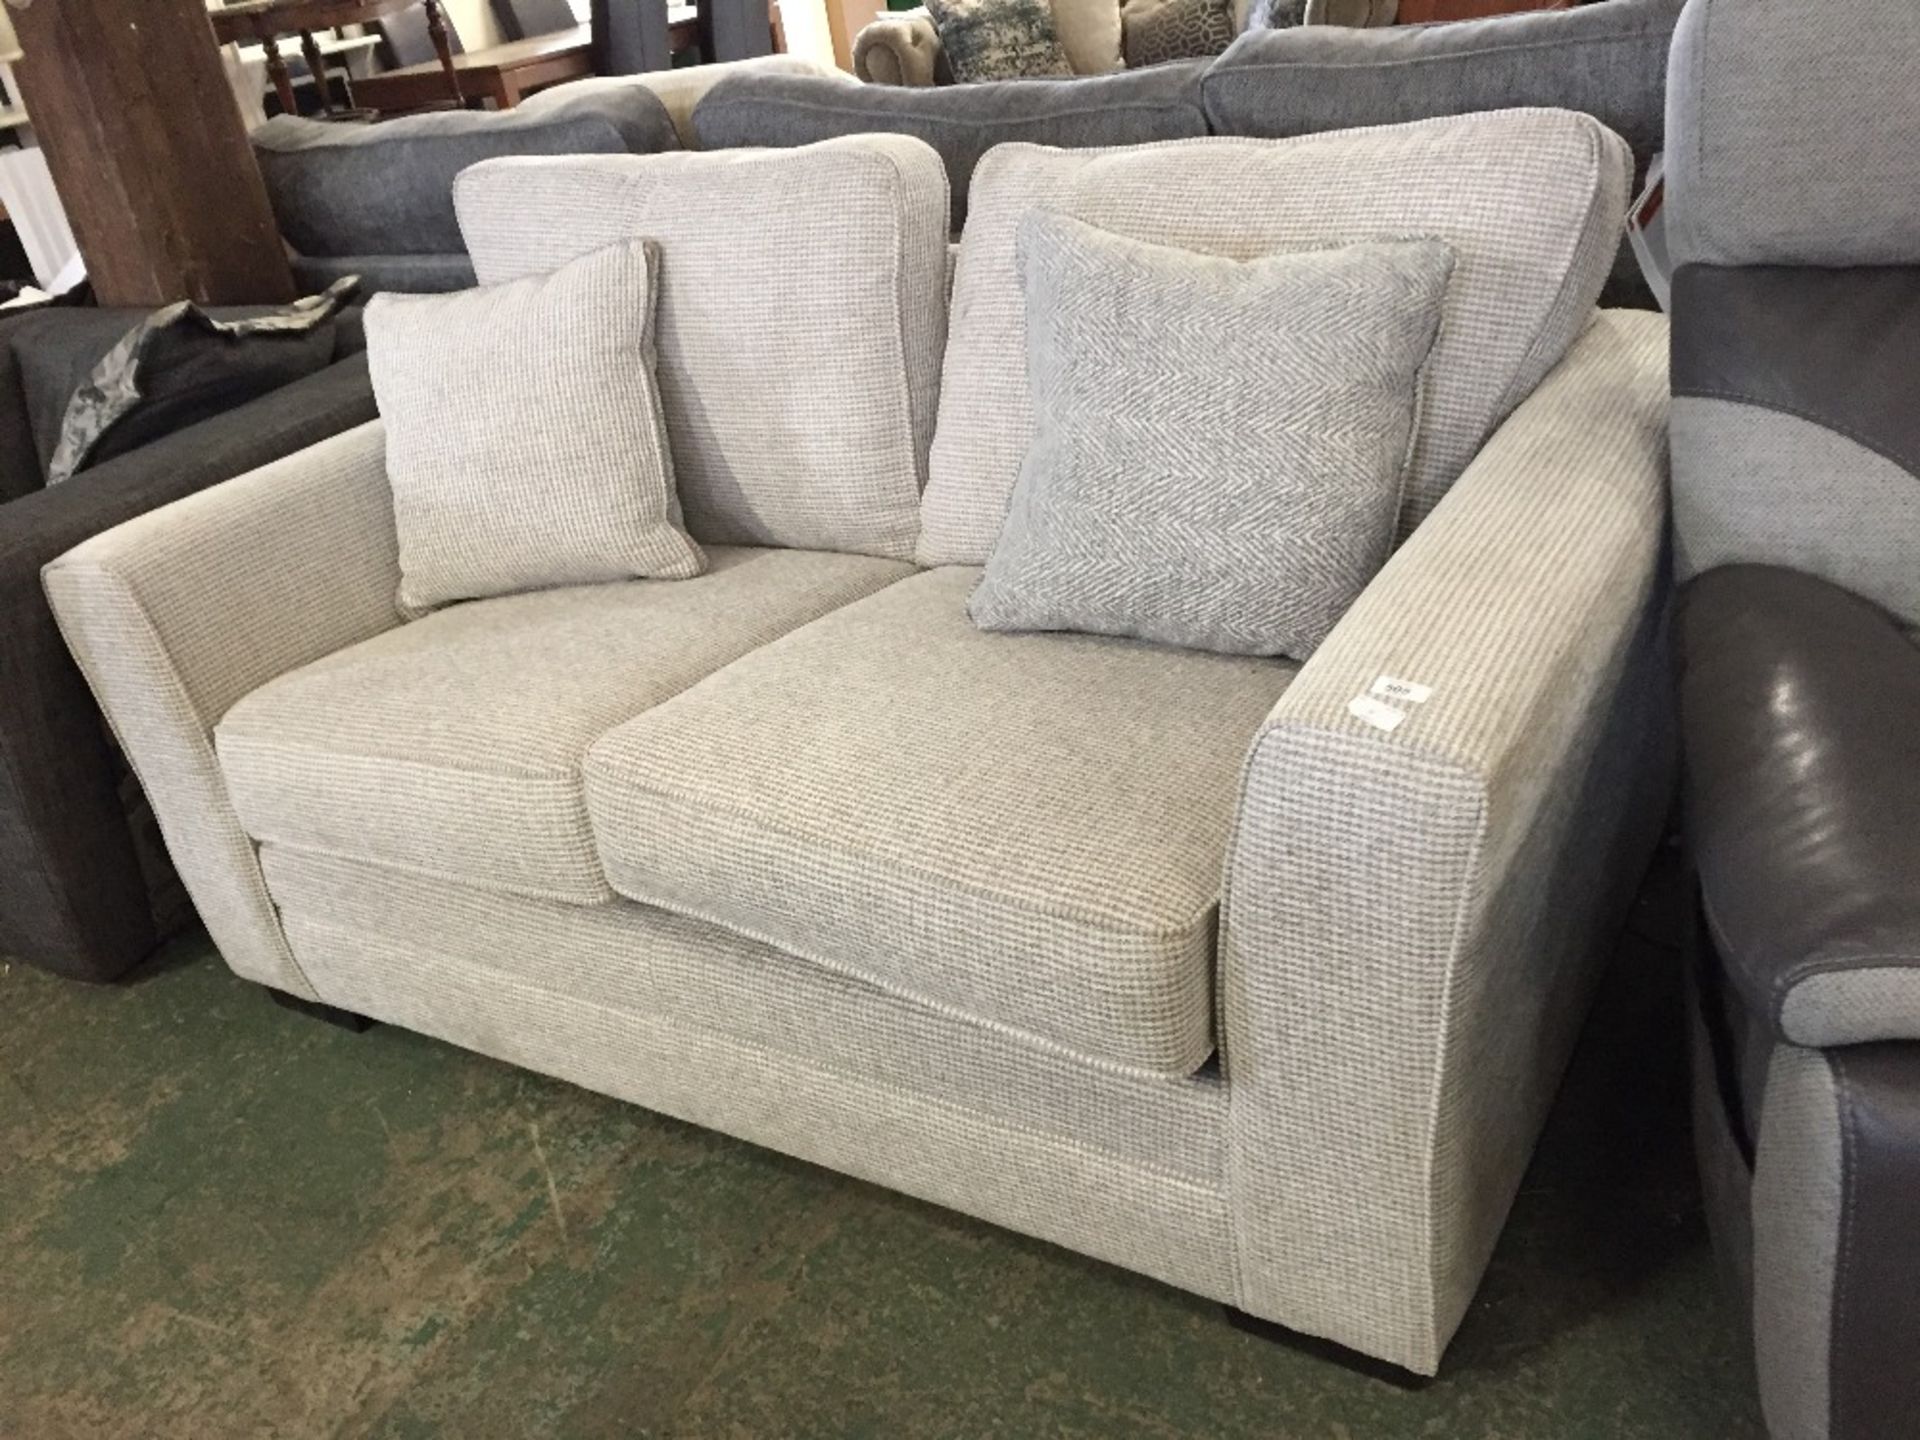 BEIGE PATTERNED 2 SEATER SOFA (WM12-5)